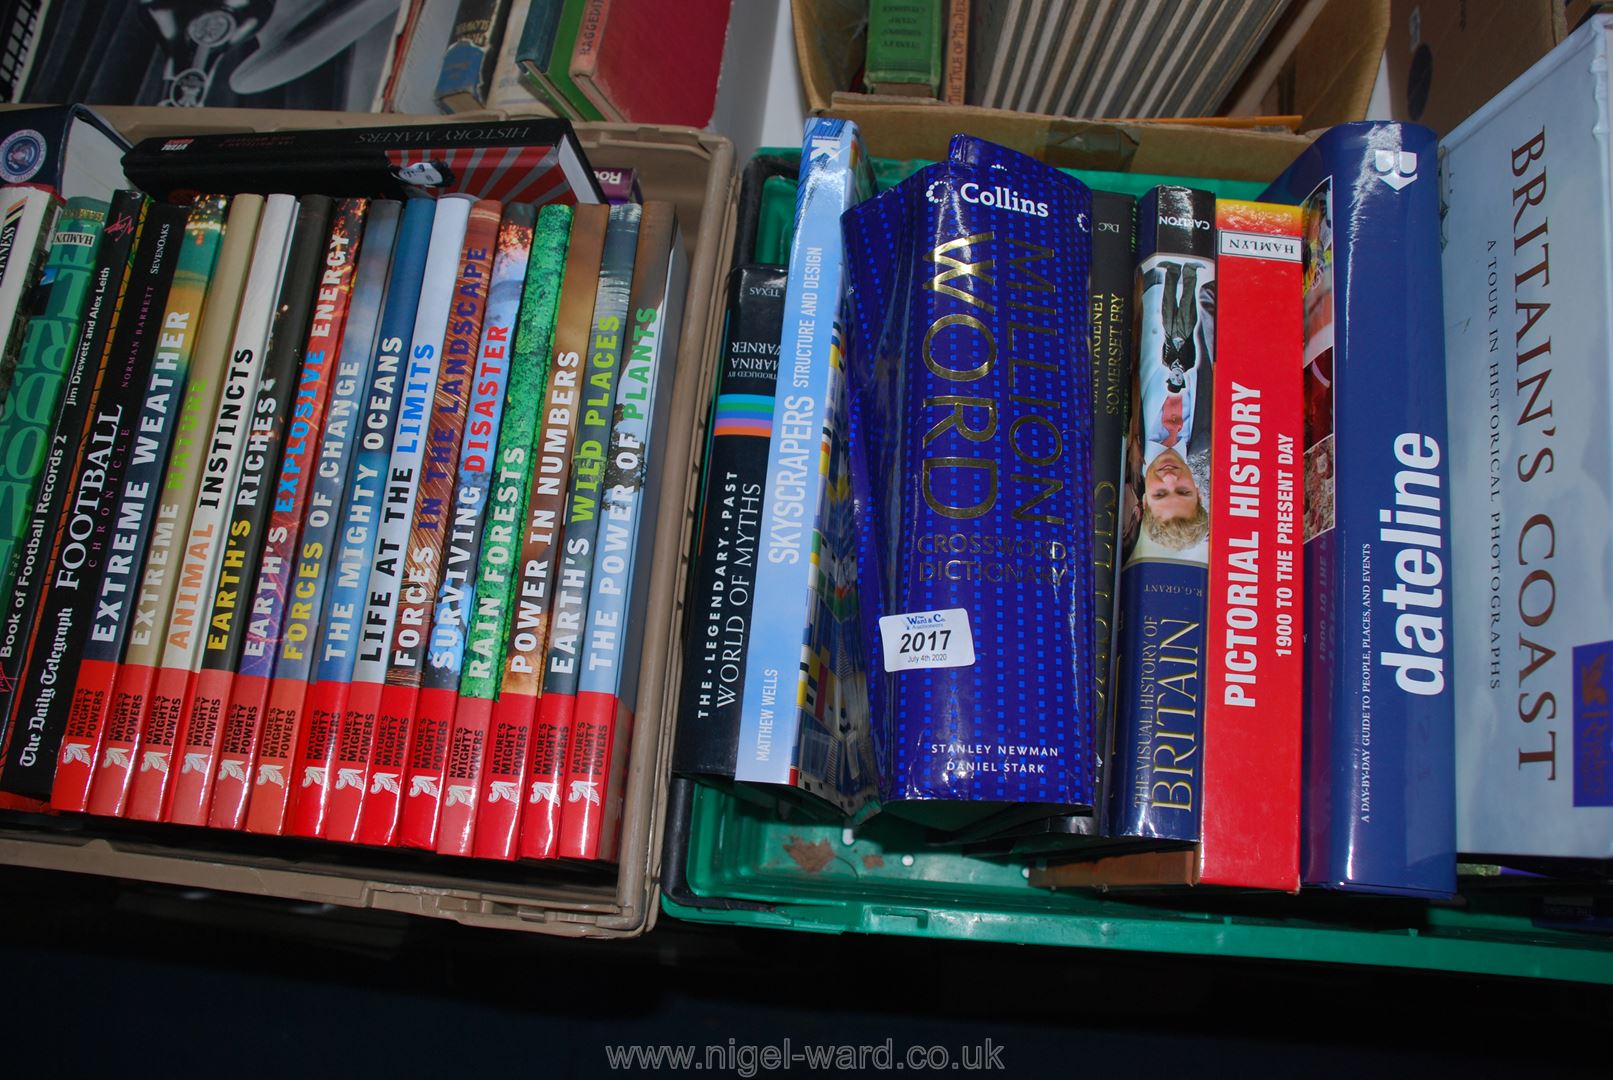 Two crates of books including Natures Mighty Powers, Football, Pictorial History,